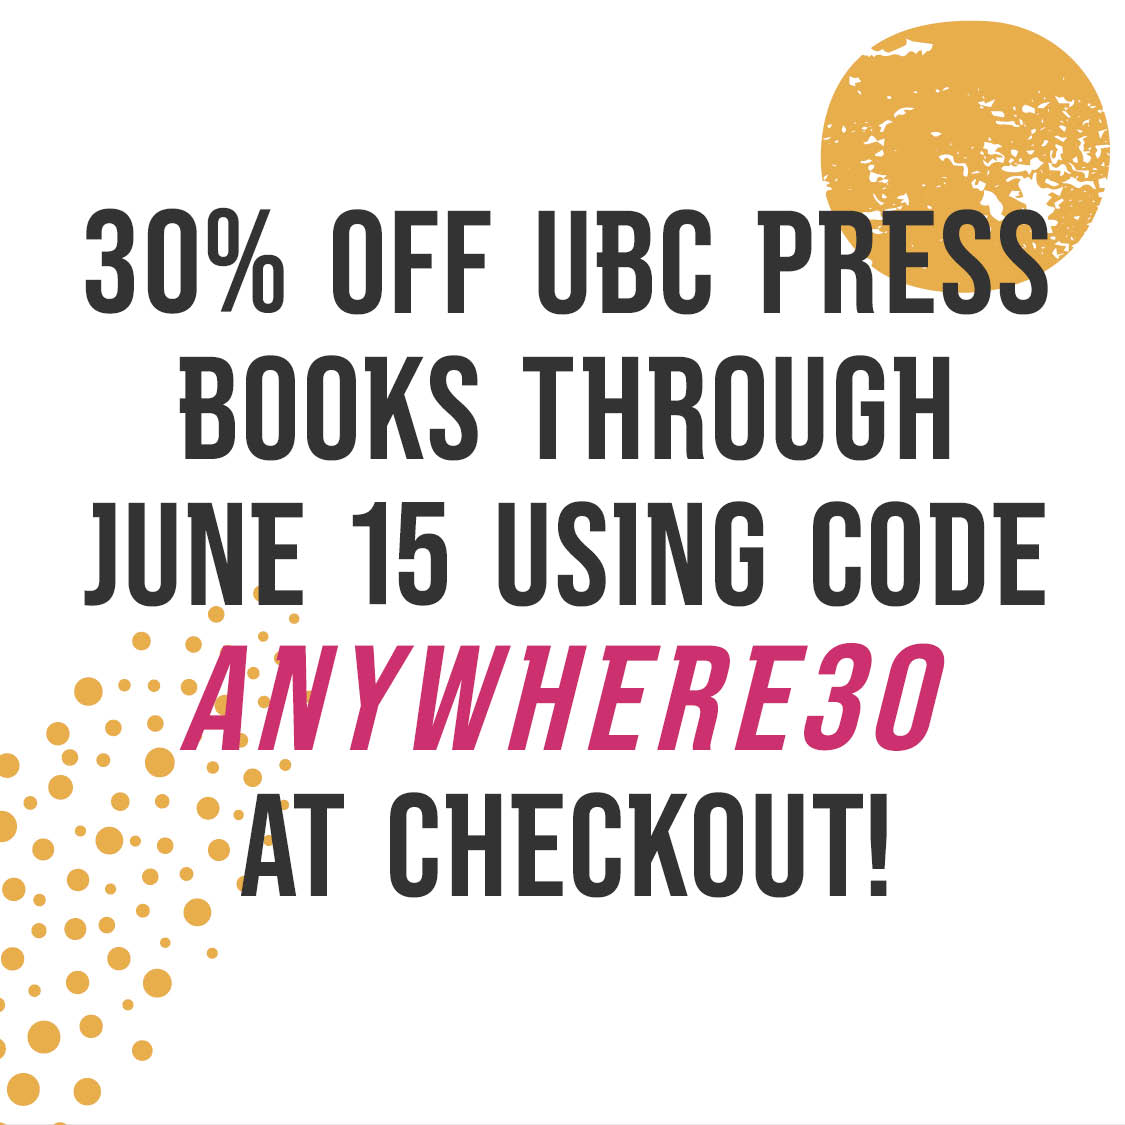 30% off UBC Press books through June 15 using code ANYWHERE30 at checkout!